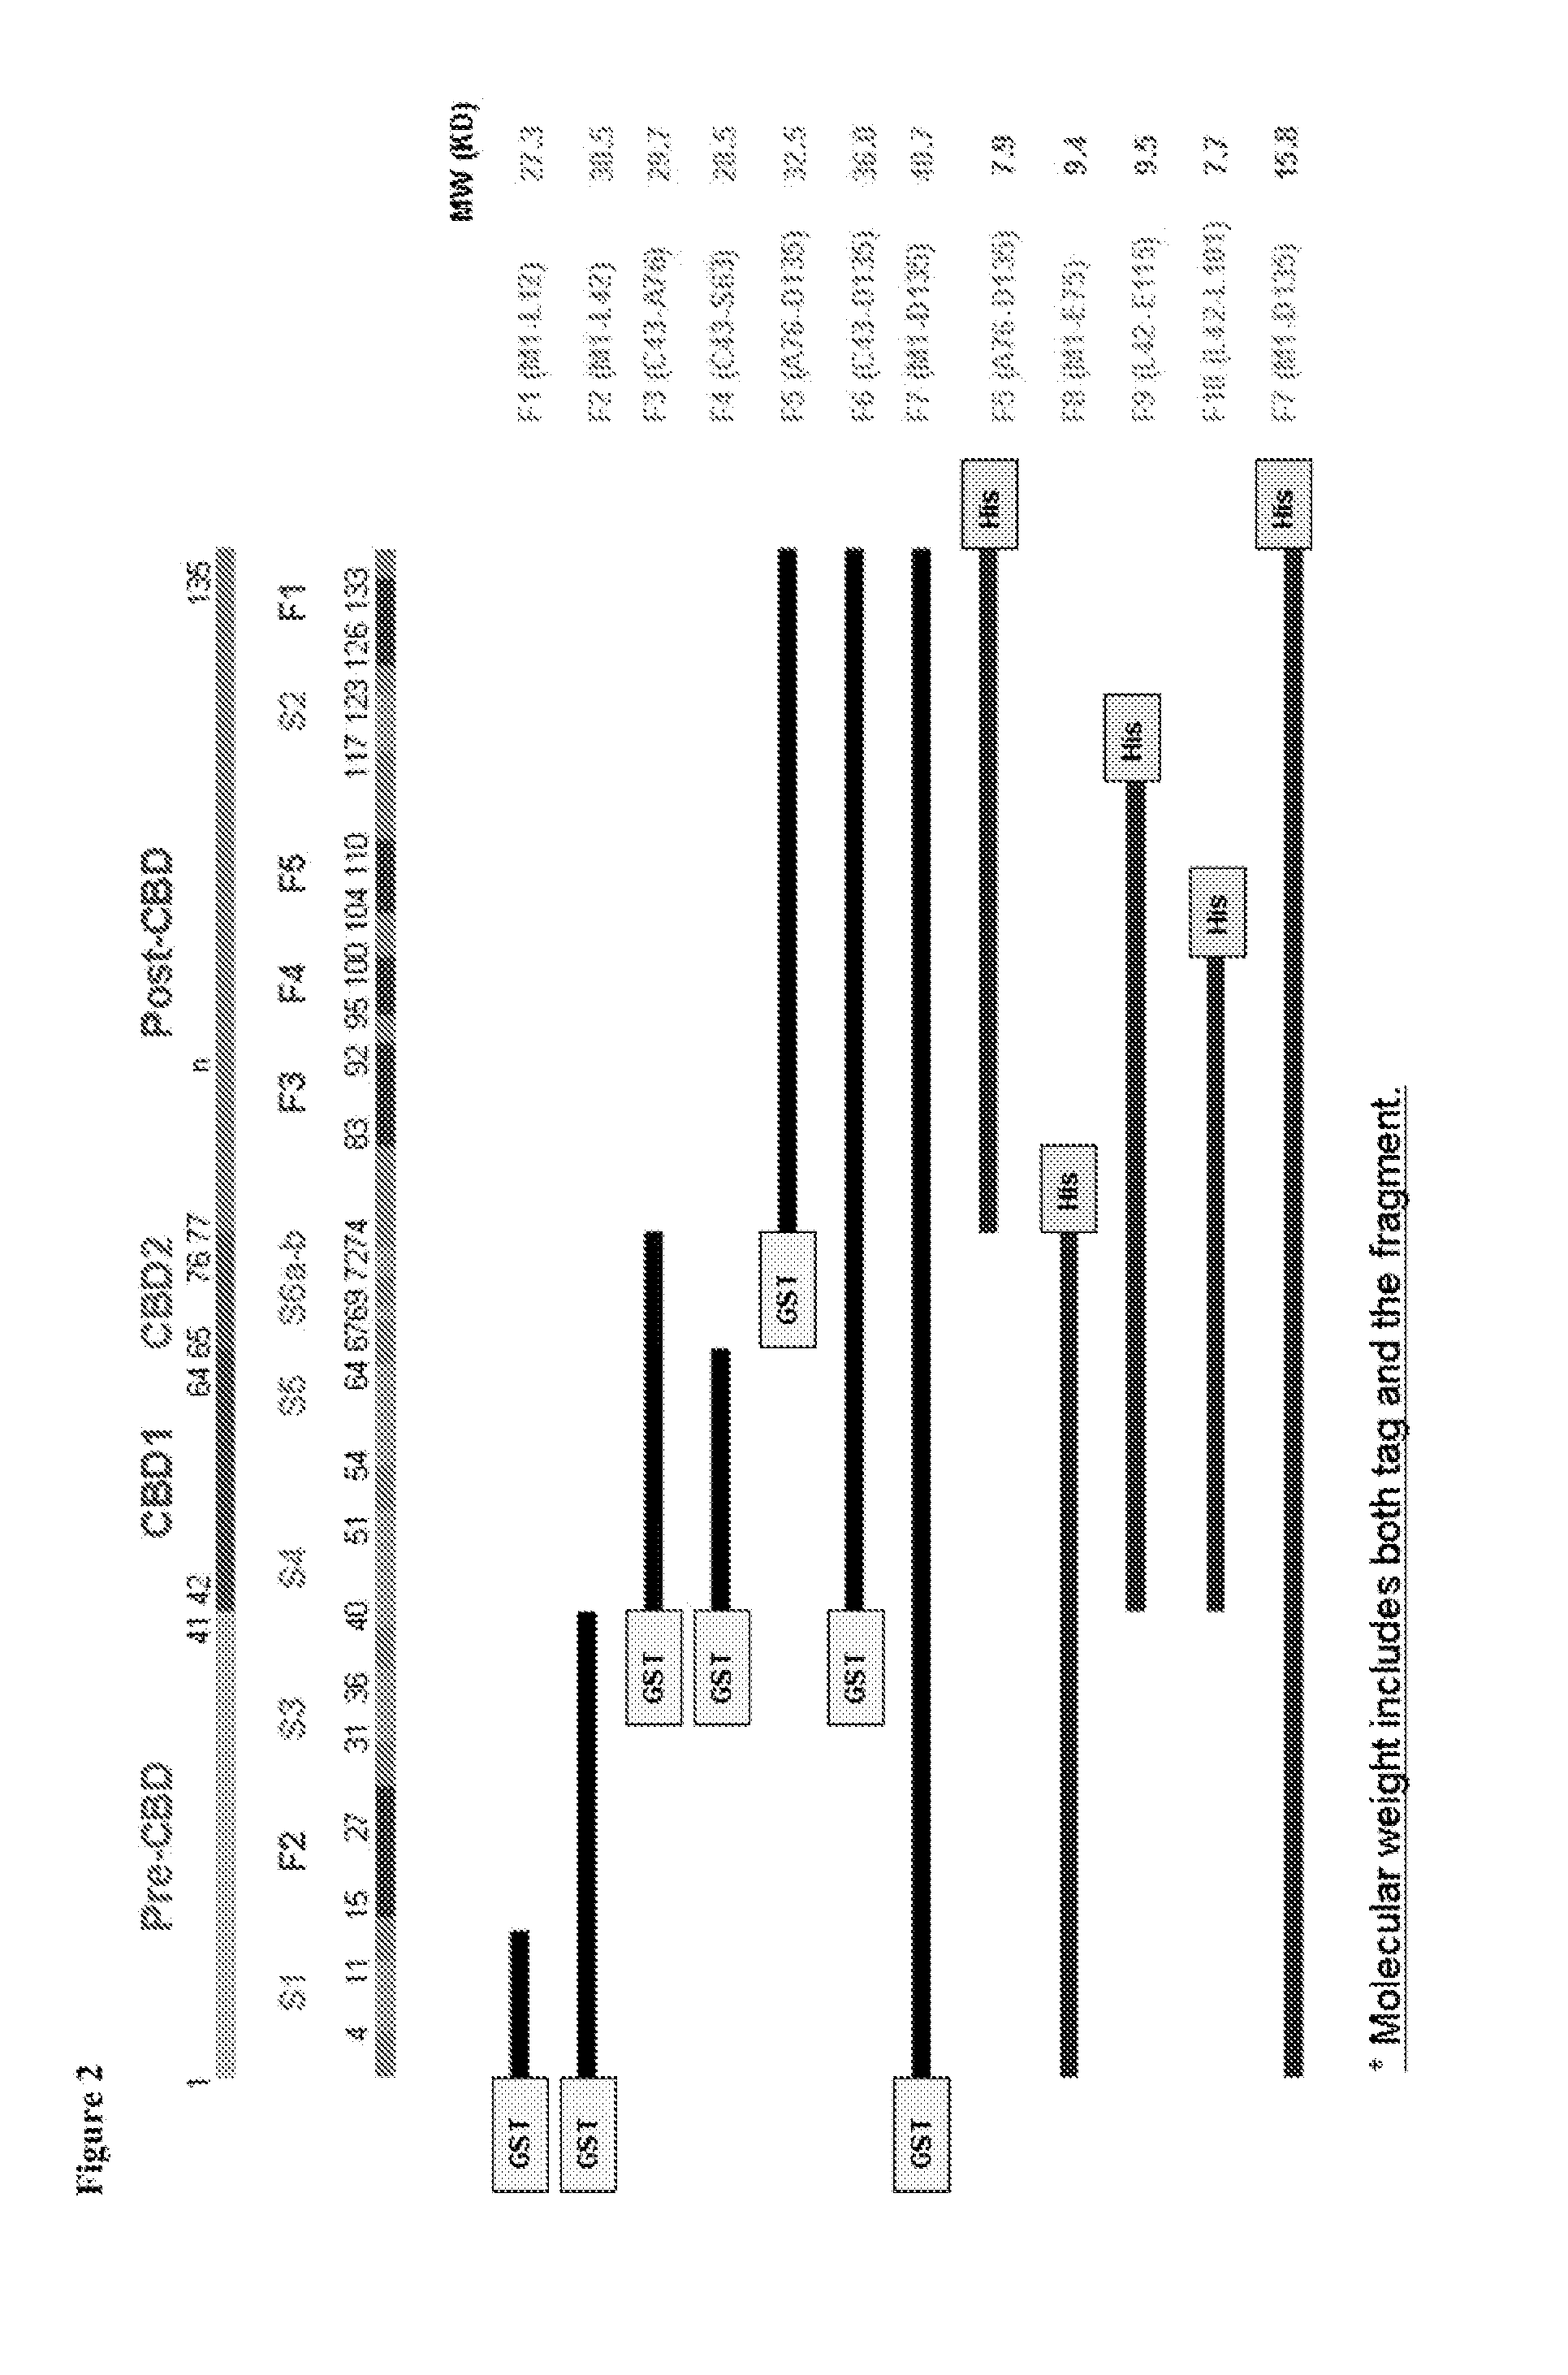 Anti-galectin-1 (GAL1) monoclonal antibodies and fragments thereof for neutralizing gal1